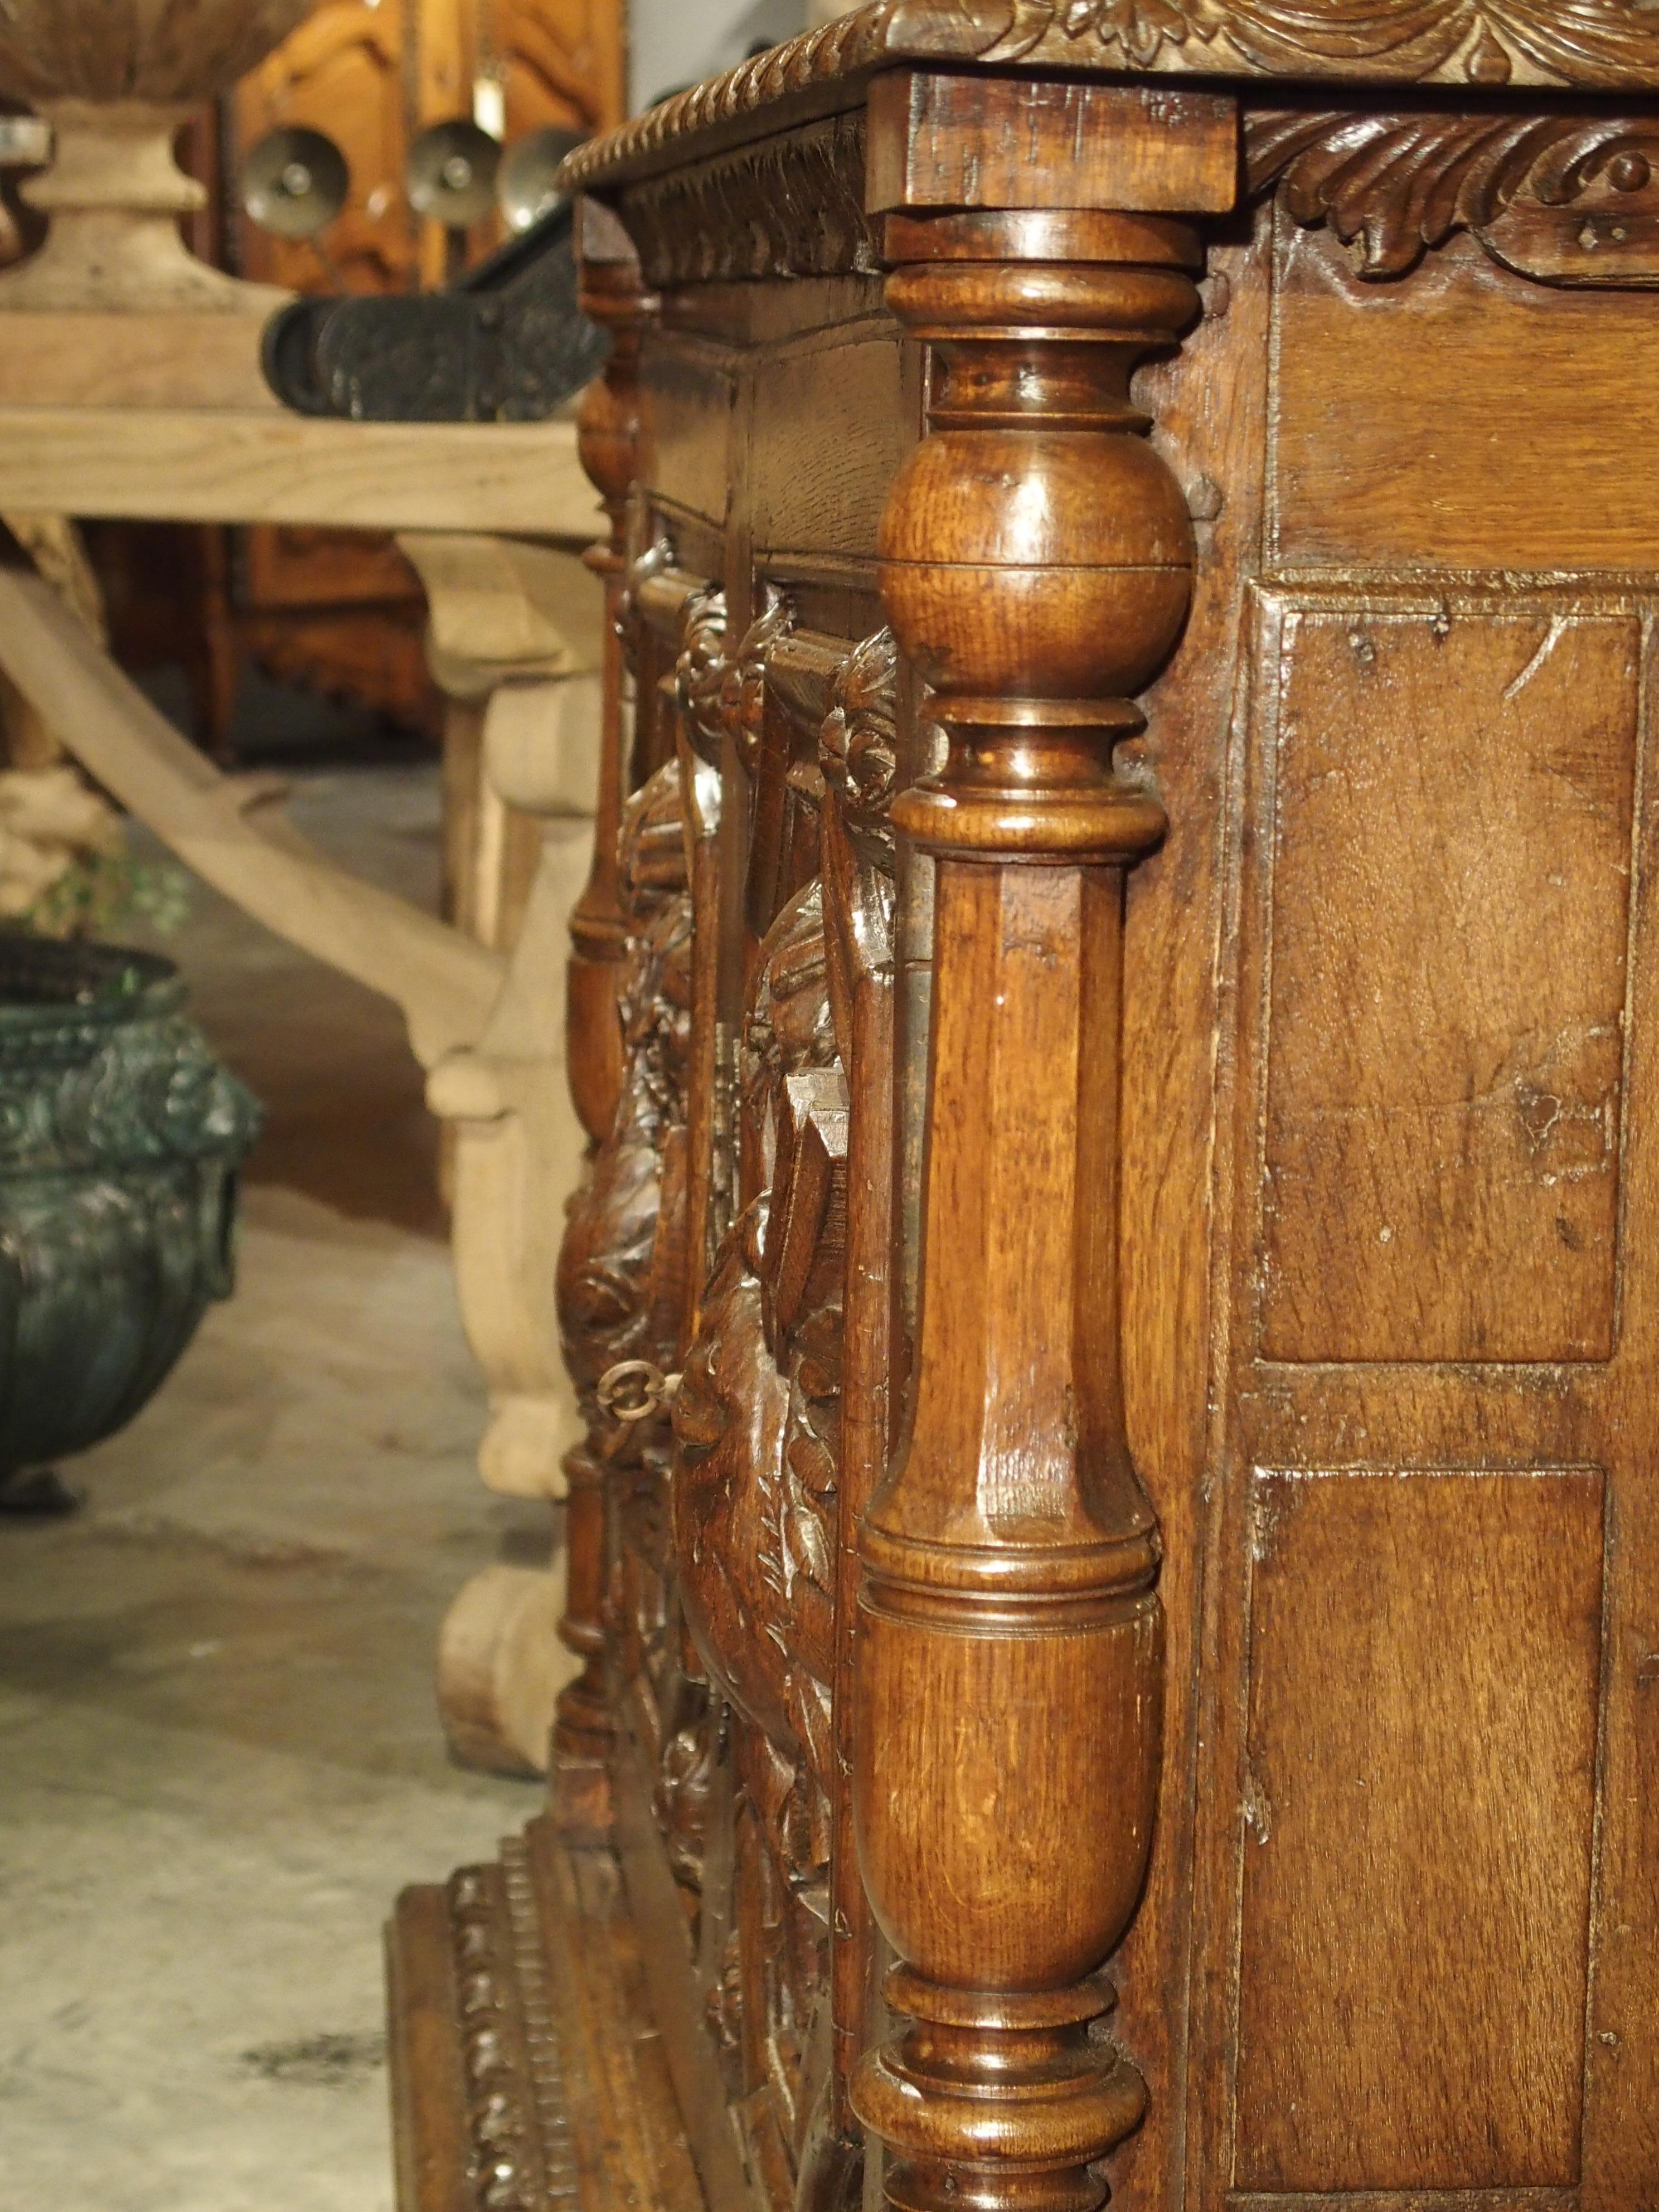 From the 1700s, this unusual French hunt buffet has expertly carved paneled doors portraying a game bird and a fish. The game bird is hanging from its feet with knotted ribbons, while the fish hangs by a hook, also from knotted ribbons. Both are